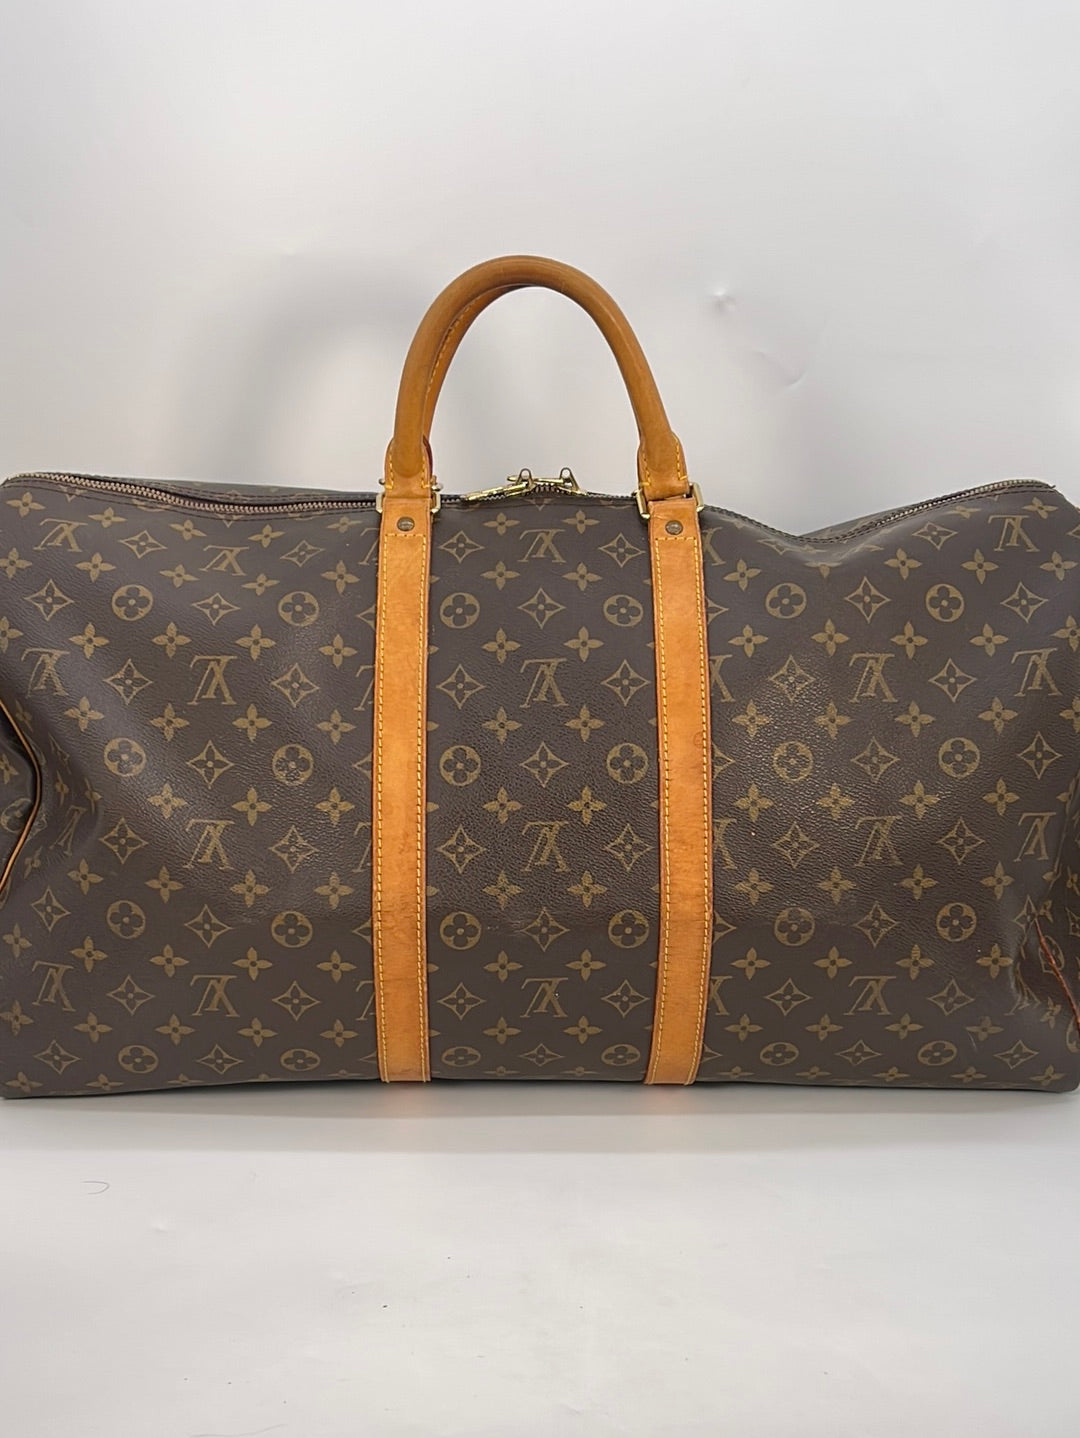 Louis Vuitton Pre-loved Monogram Keepall Bandouliere